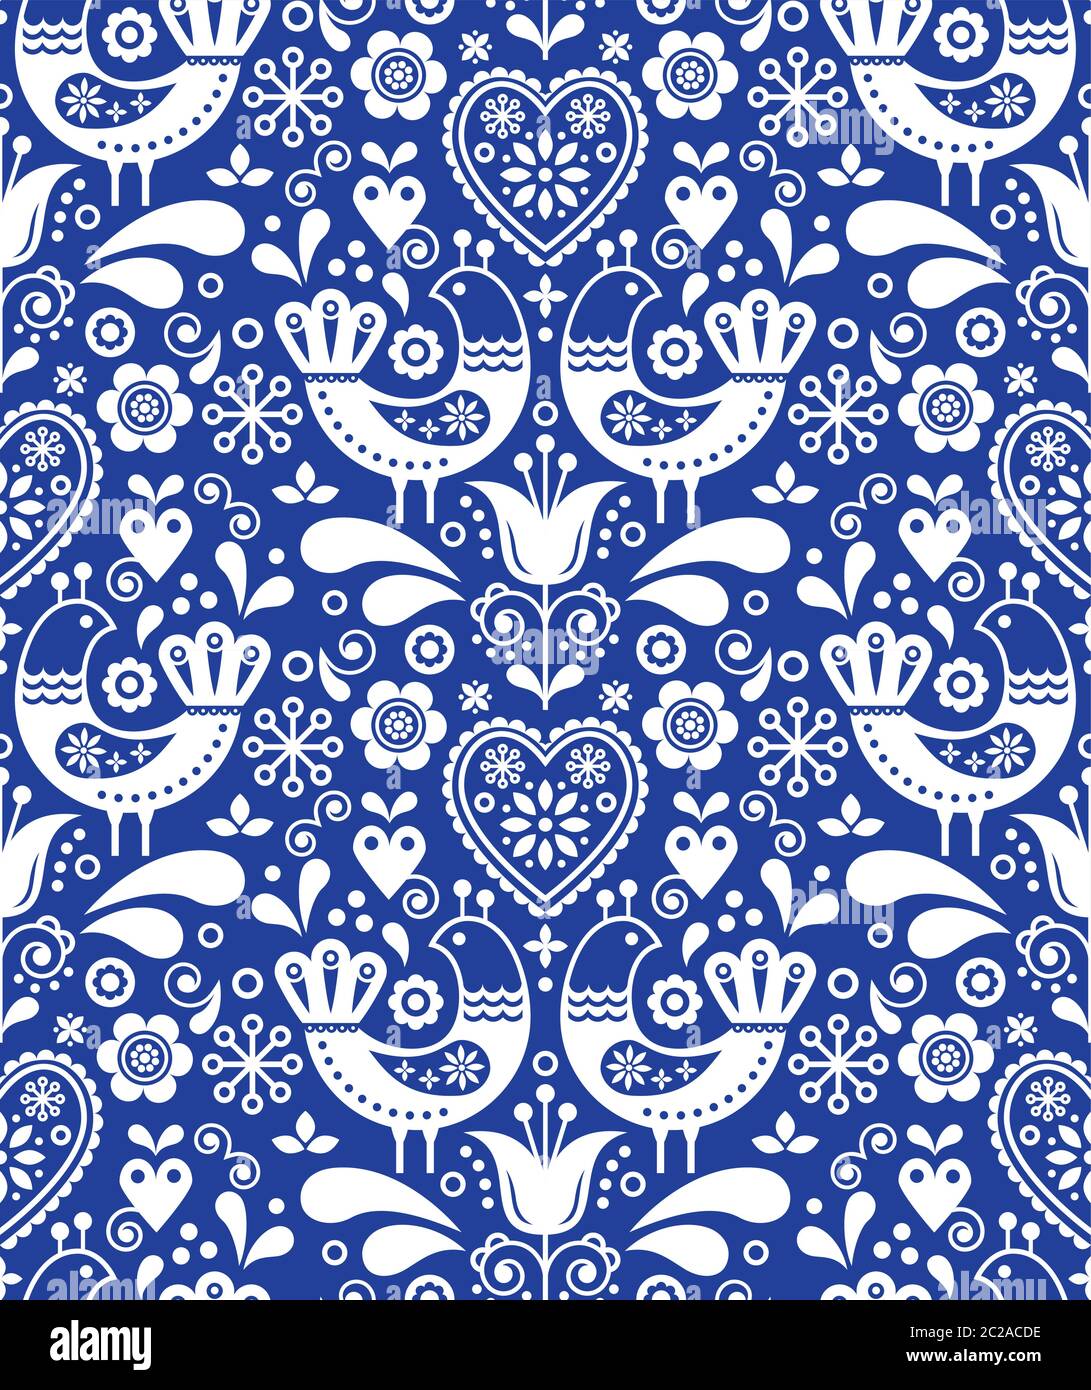 Scandinavian seamless folk art pattern with birds and flowers, Nordic floral design, retro background in white on navy blue Stock Vector